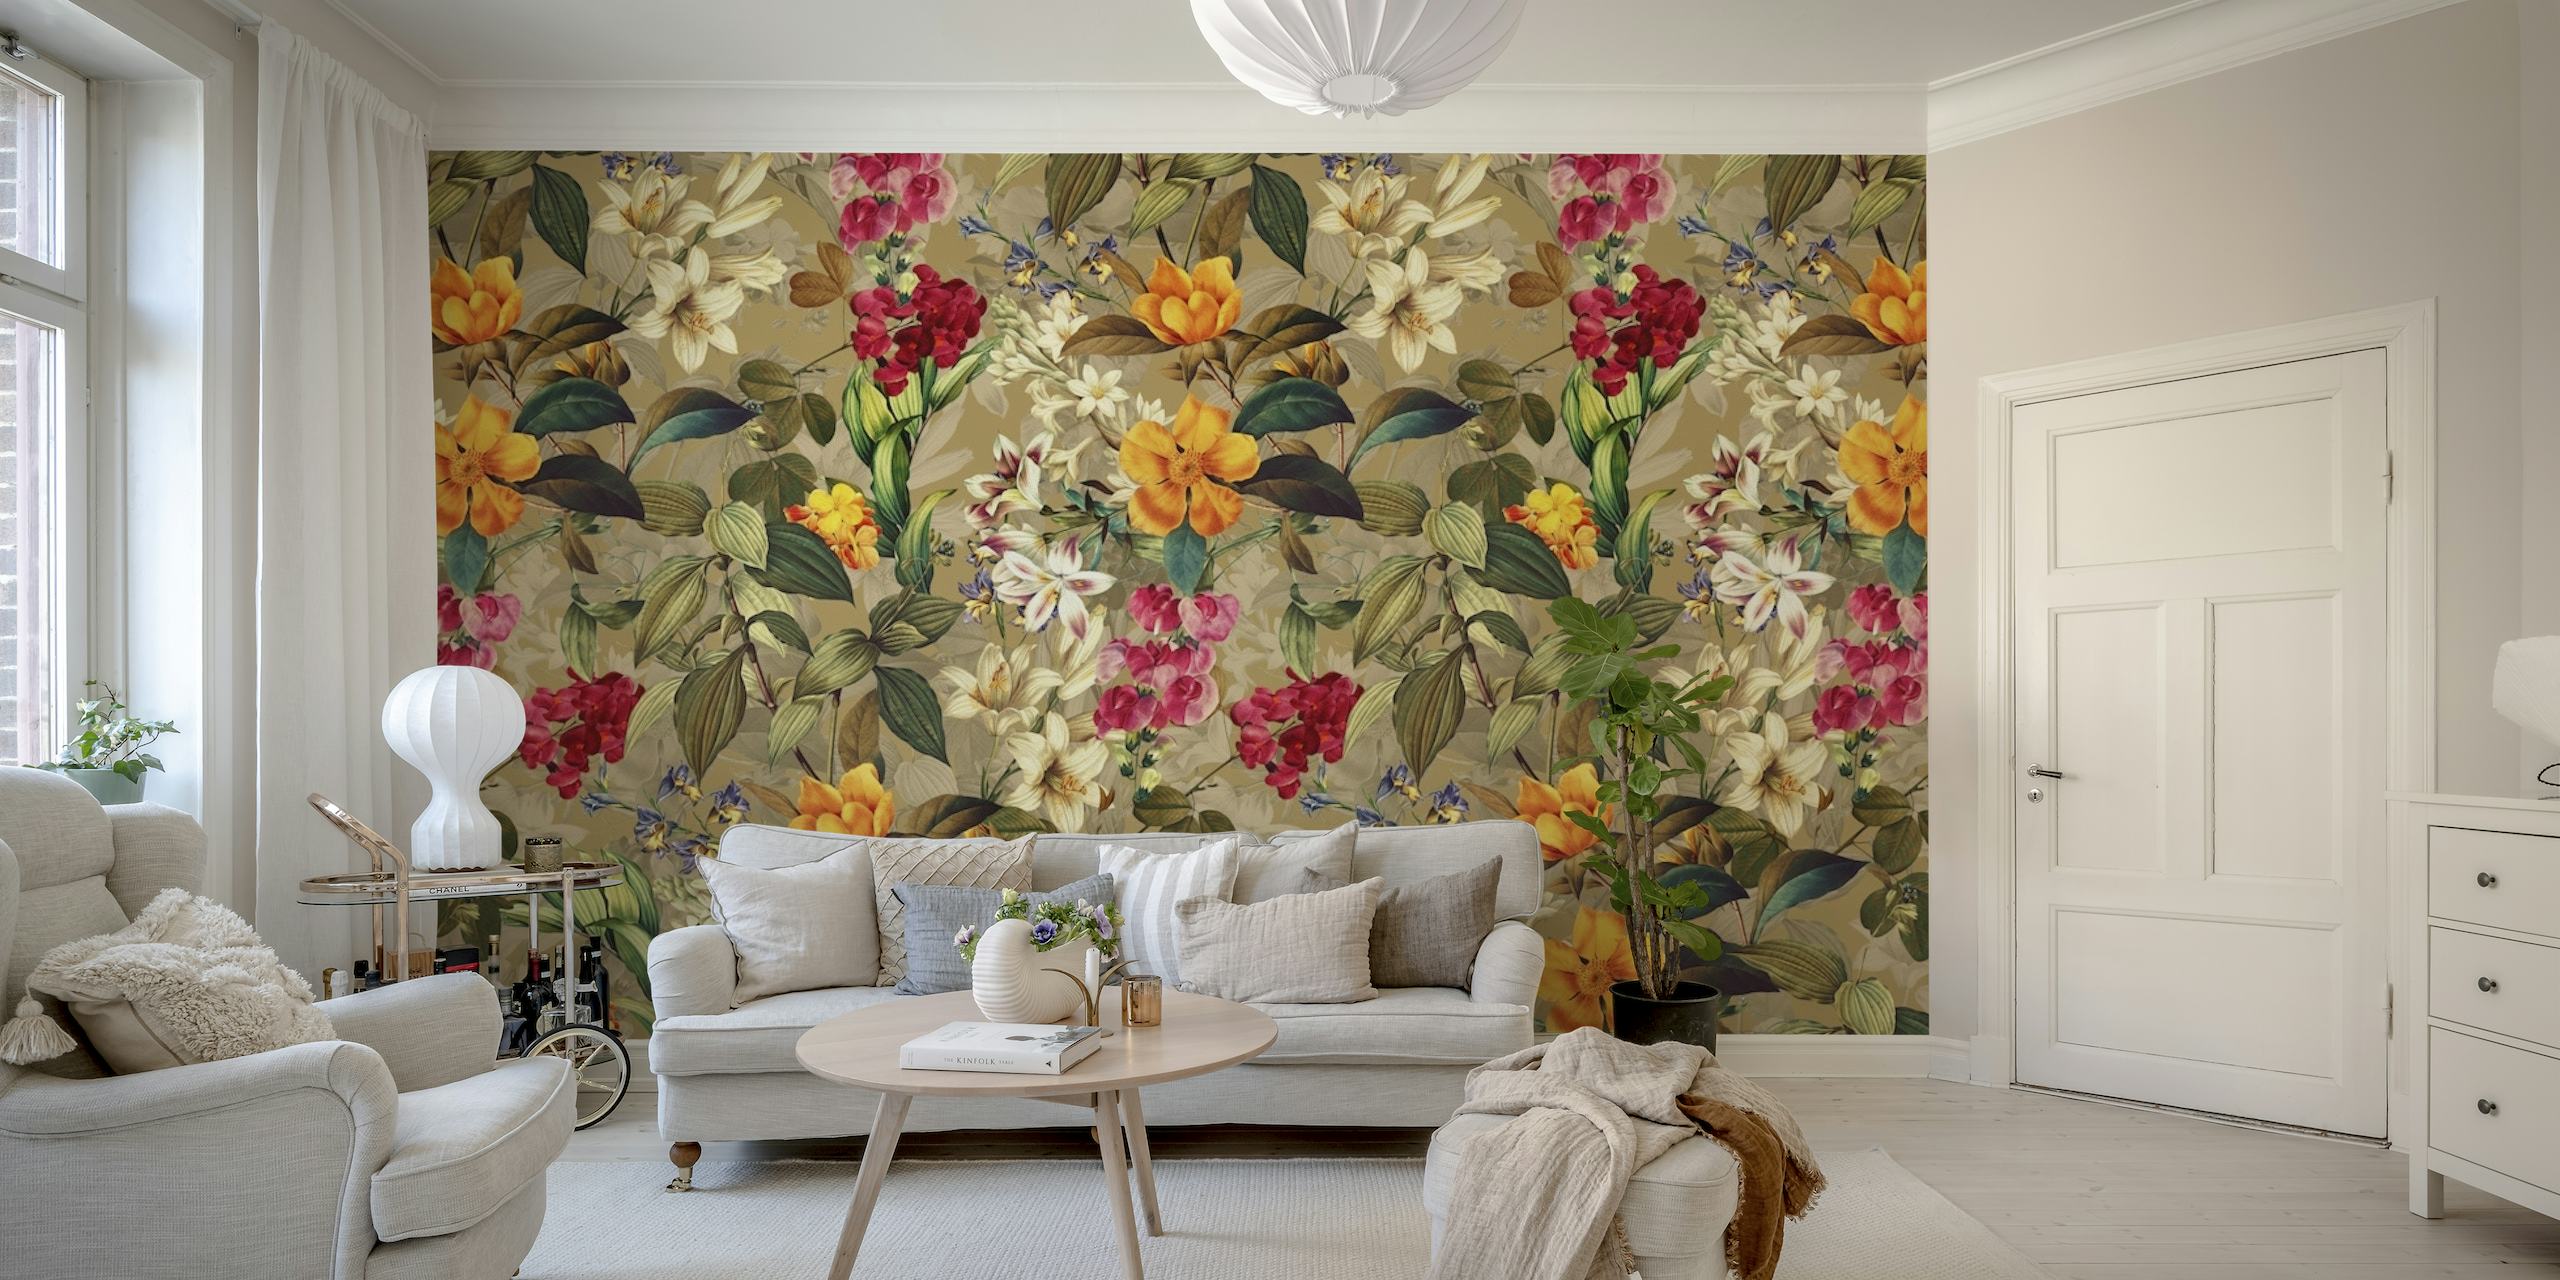 An array of summer flowers in full bloom featuring yellows, reds, and whites creating a lush wall mural